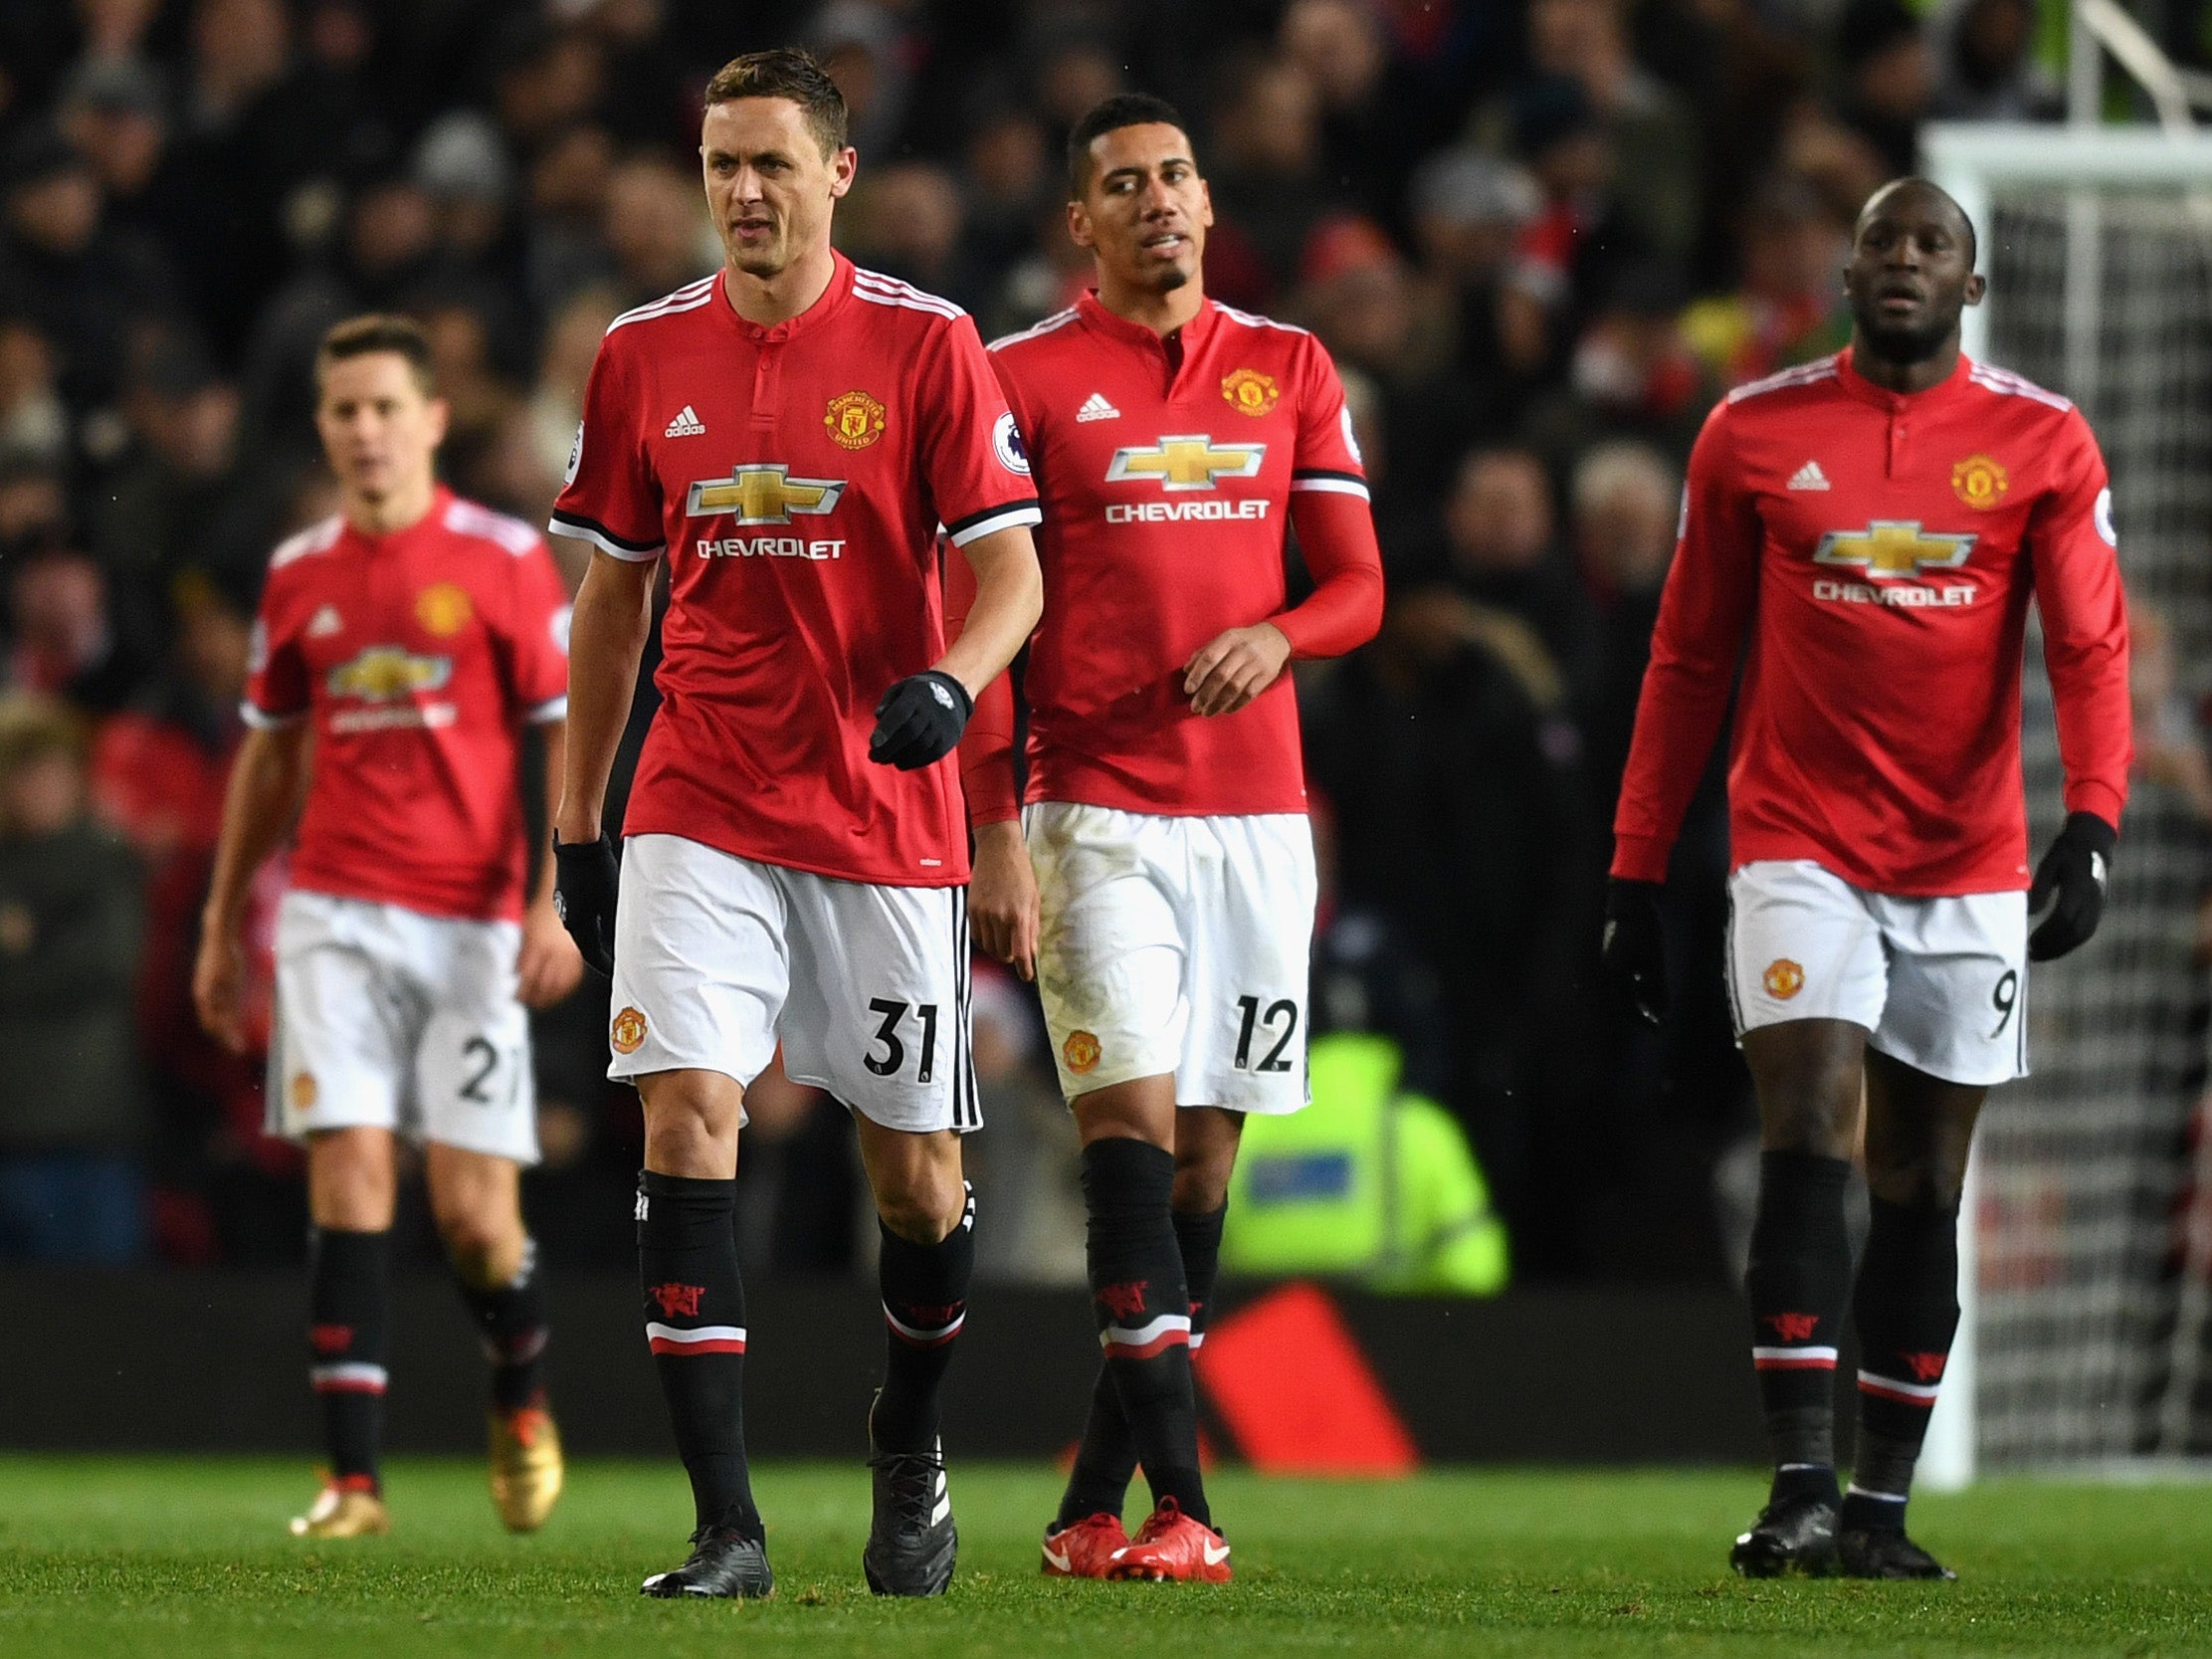 United will see their draw as a favourable one